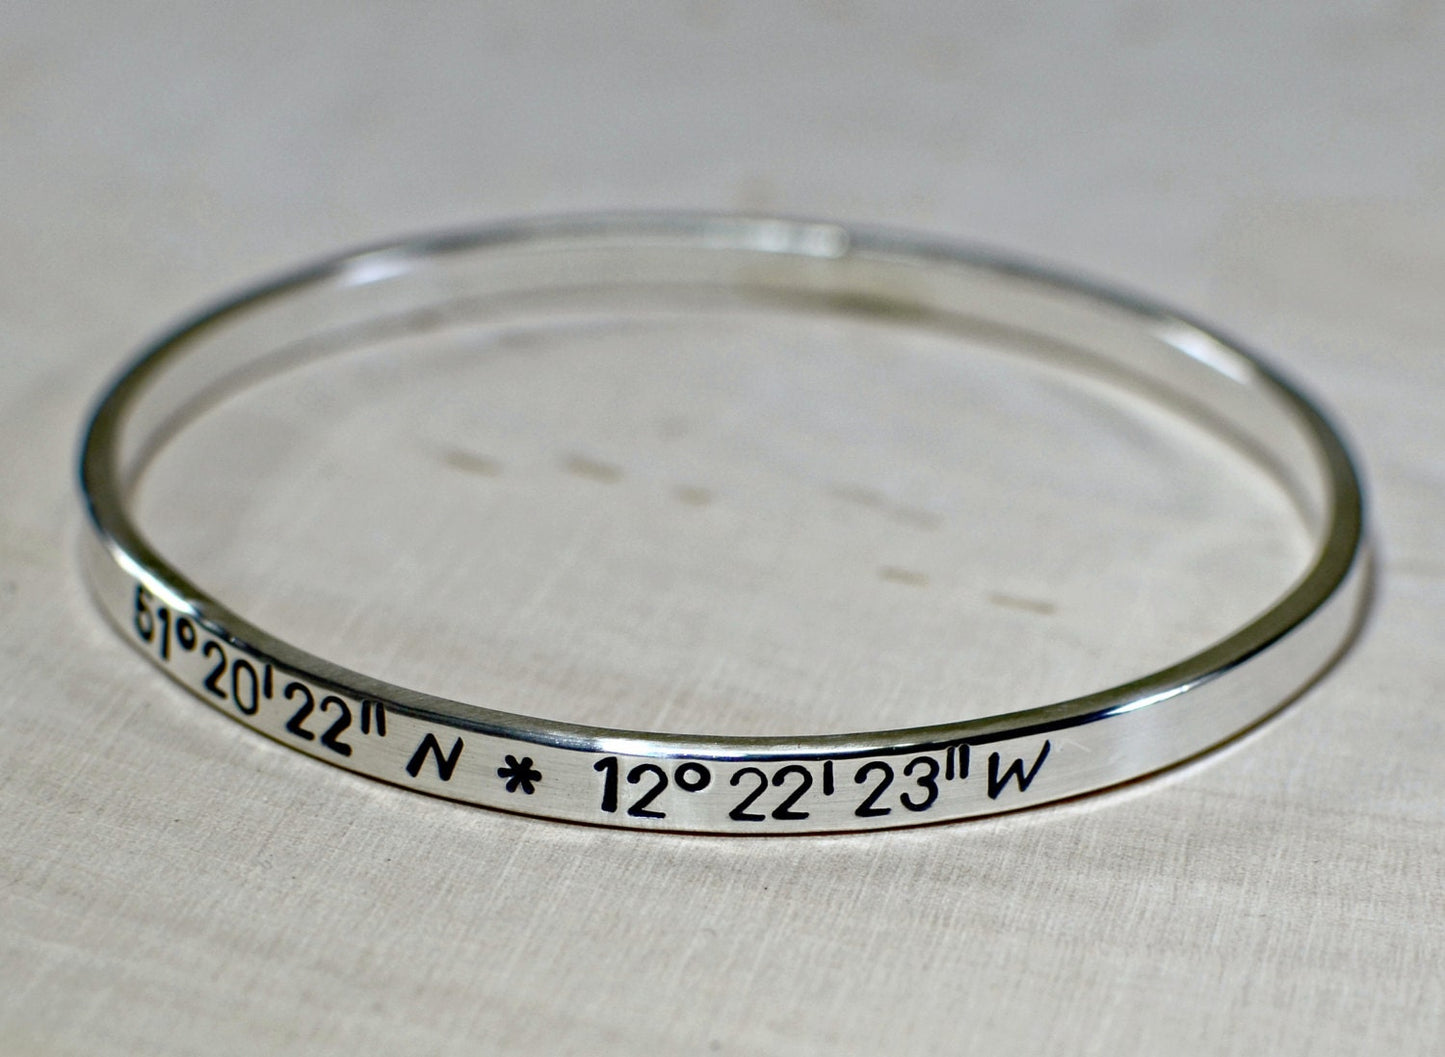 Bangle with Personalized Latitude Longitude Coordinates in Sterling Silver